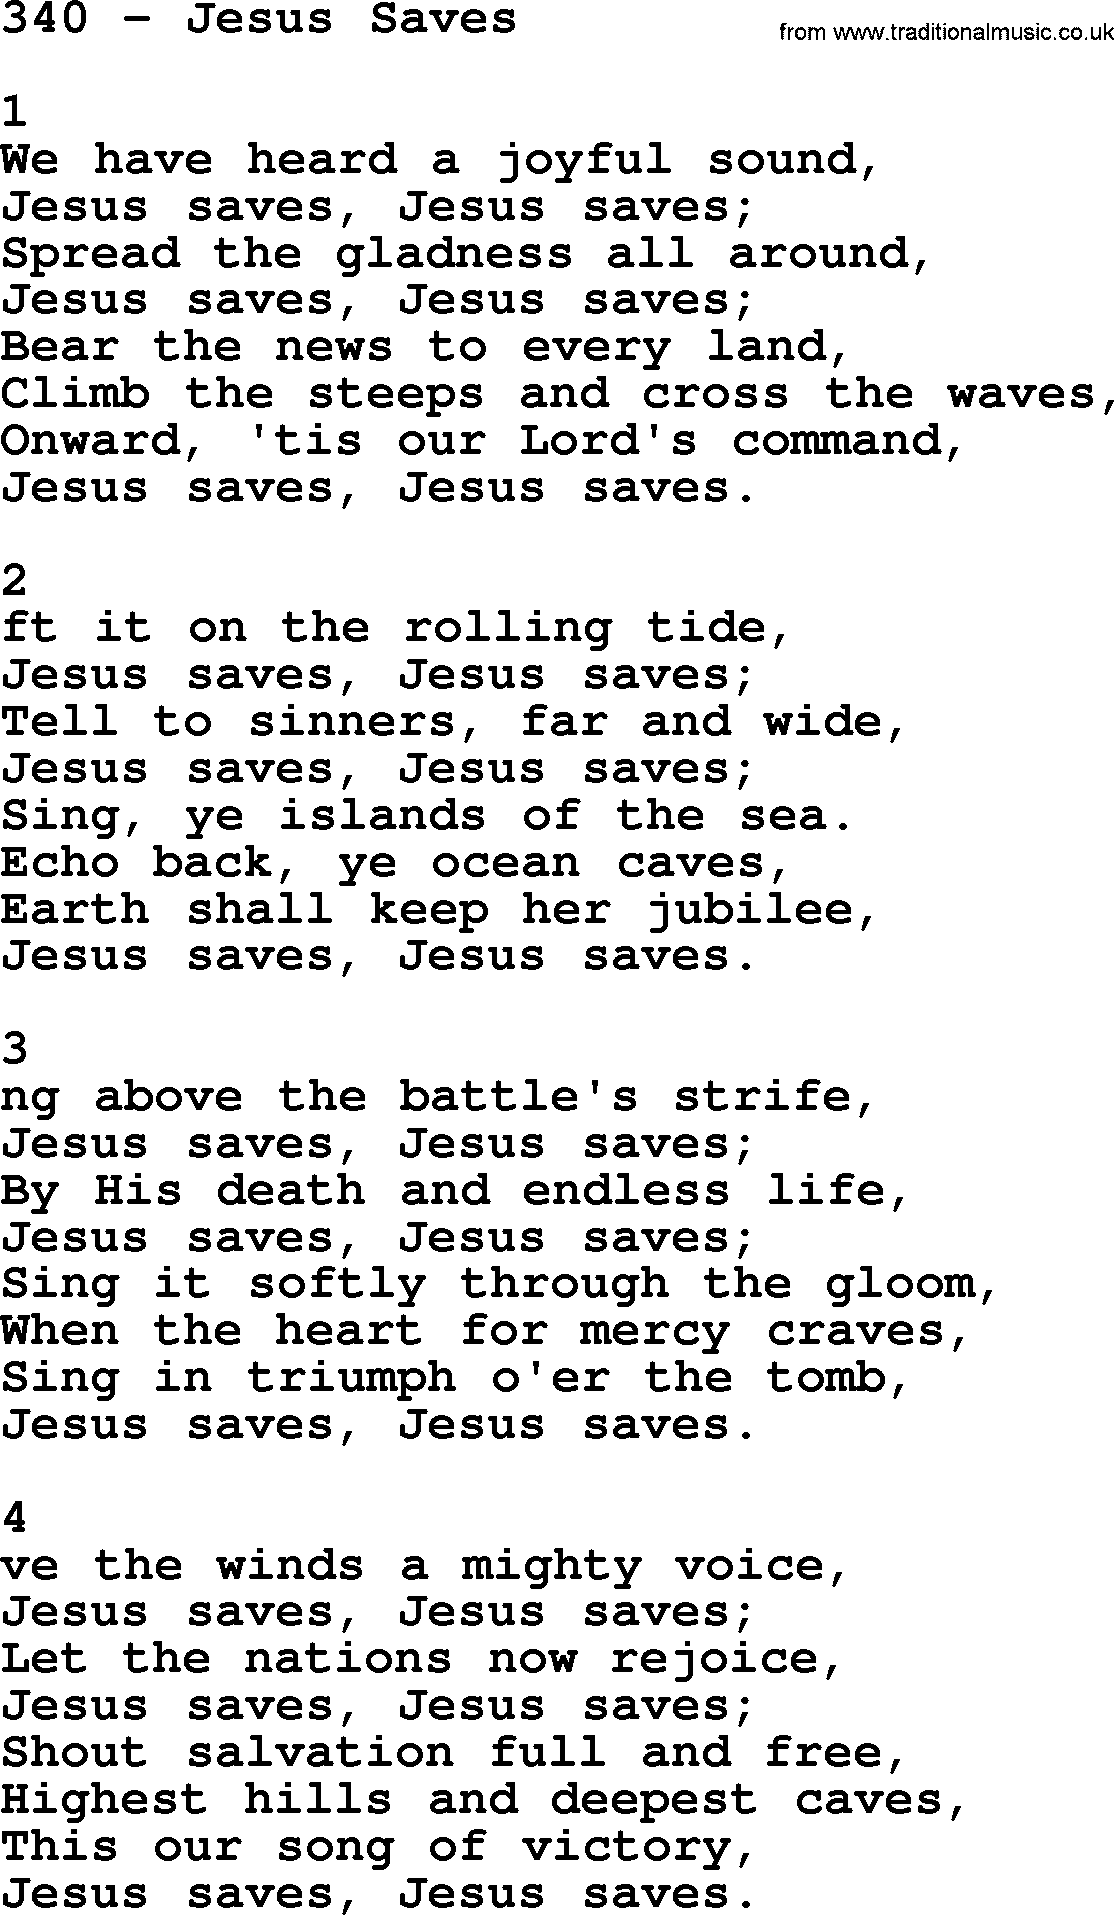 Complete Adventis Hymnal, title: 340-Jesus Saves, with lyrics, midi, mp3, powerpoints(PPT) and PDF,